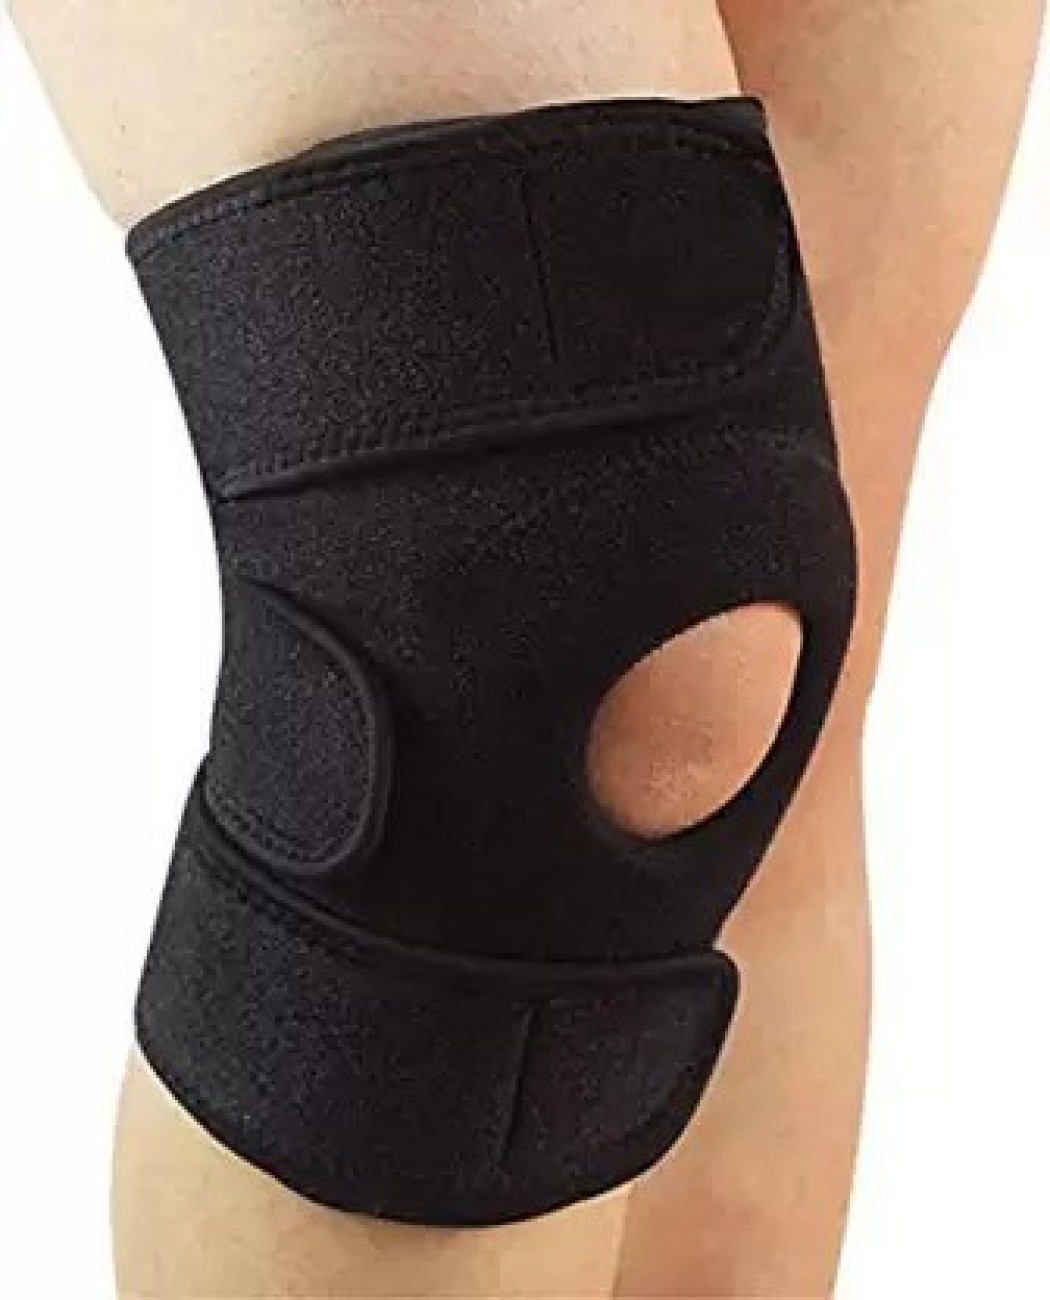 ALORNOR Adjustable Knee Cap Support Sports, Knee Brace Gym, Running and  Walking Knee Support - Buy ALORNOR Adjustable Knee Cap Support Sports, Knee  Brace Gym, Running and Walking Knee Support Online at